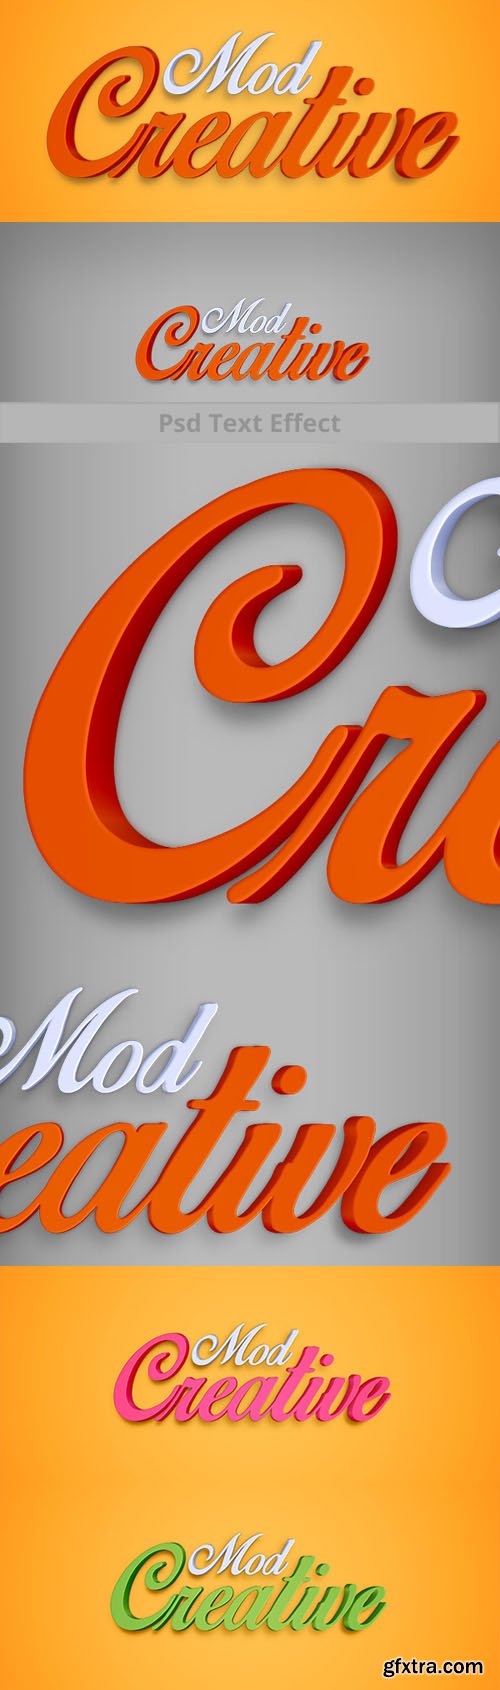 CreativeMod PSD Text Effects